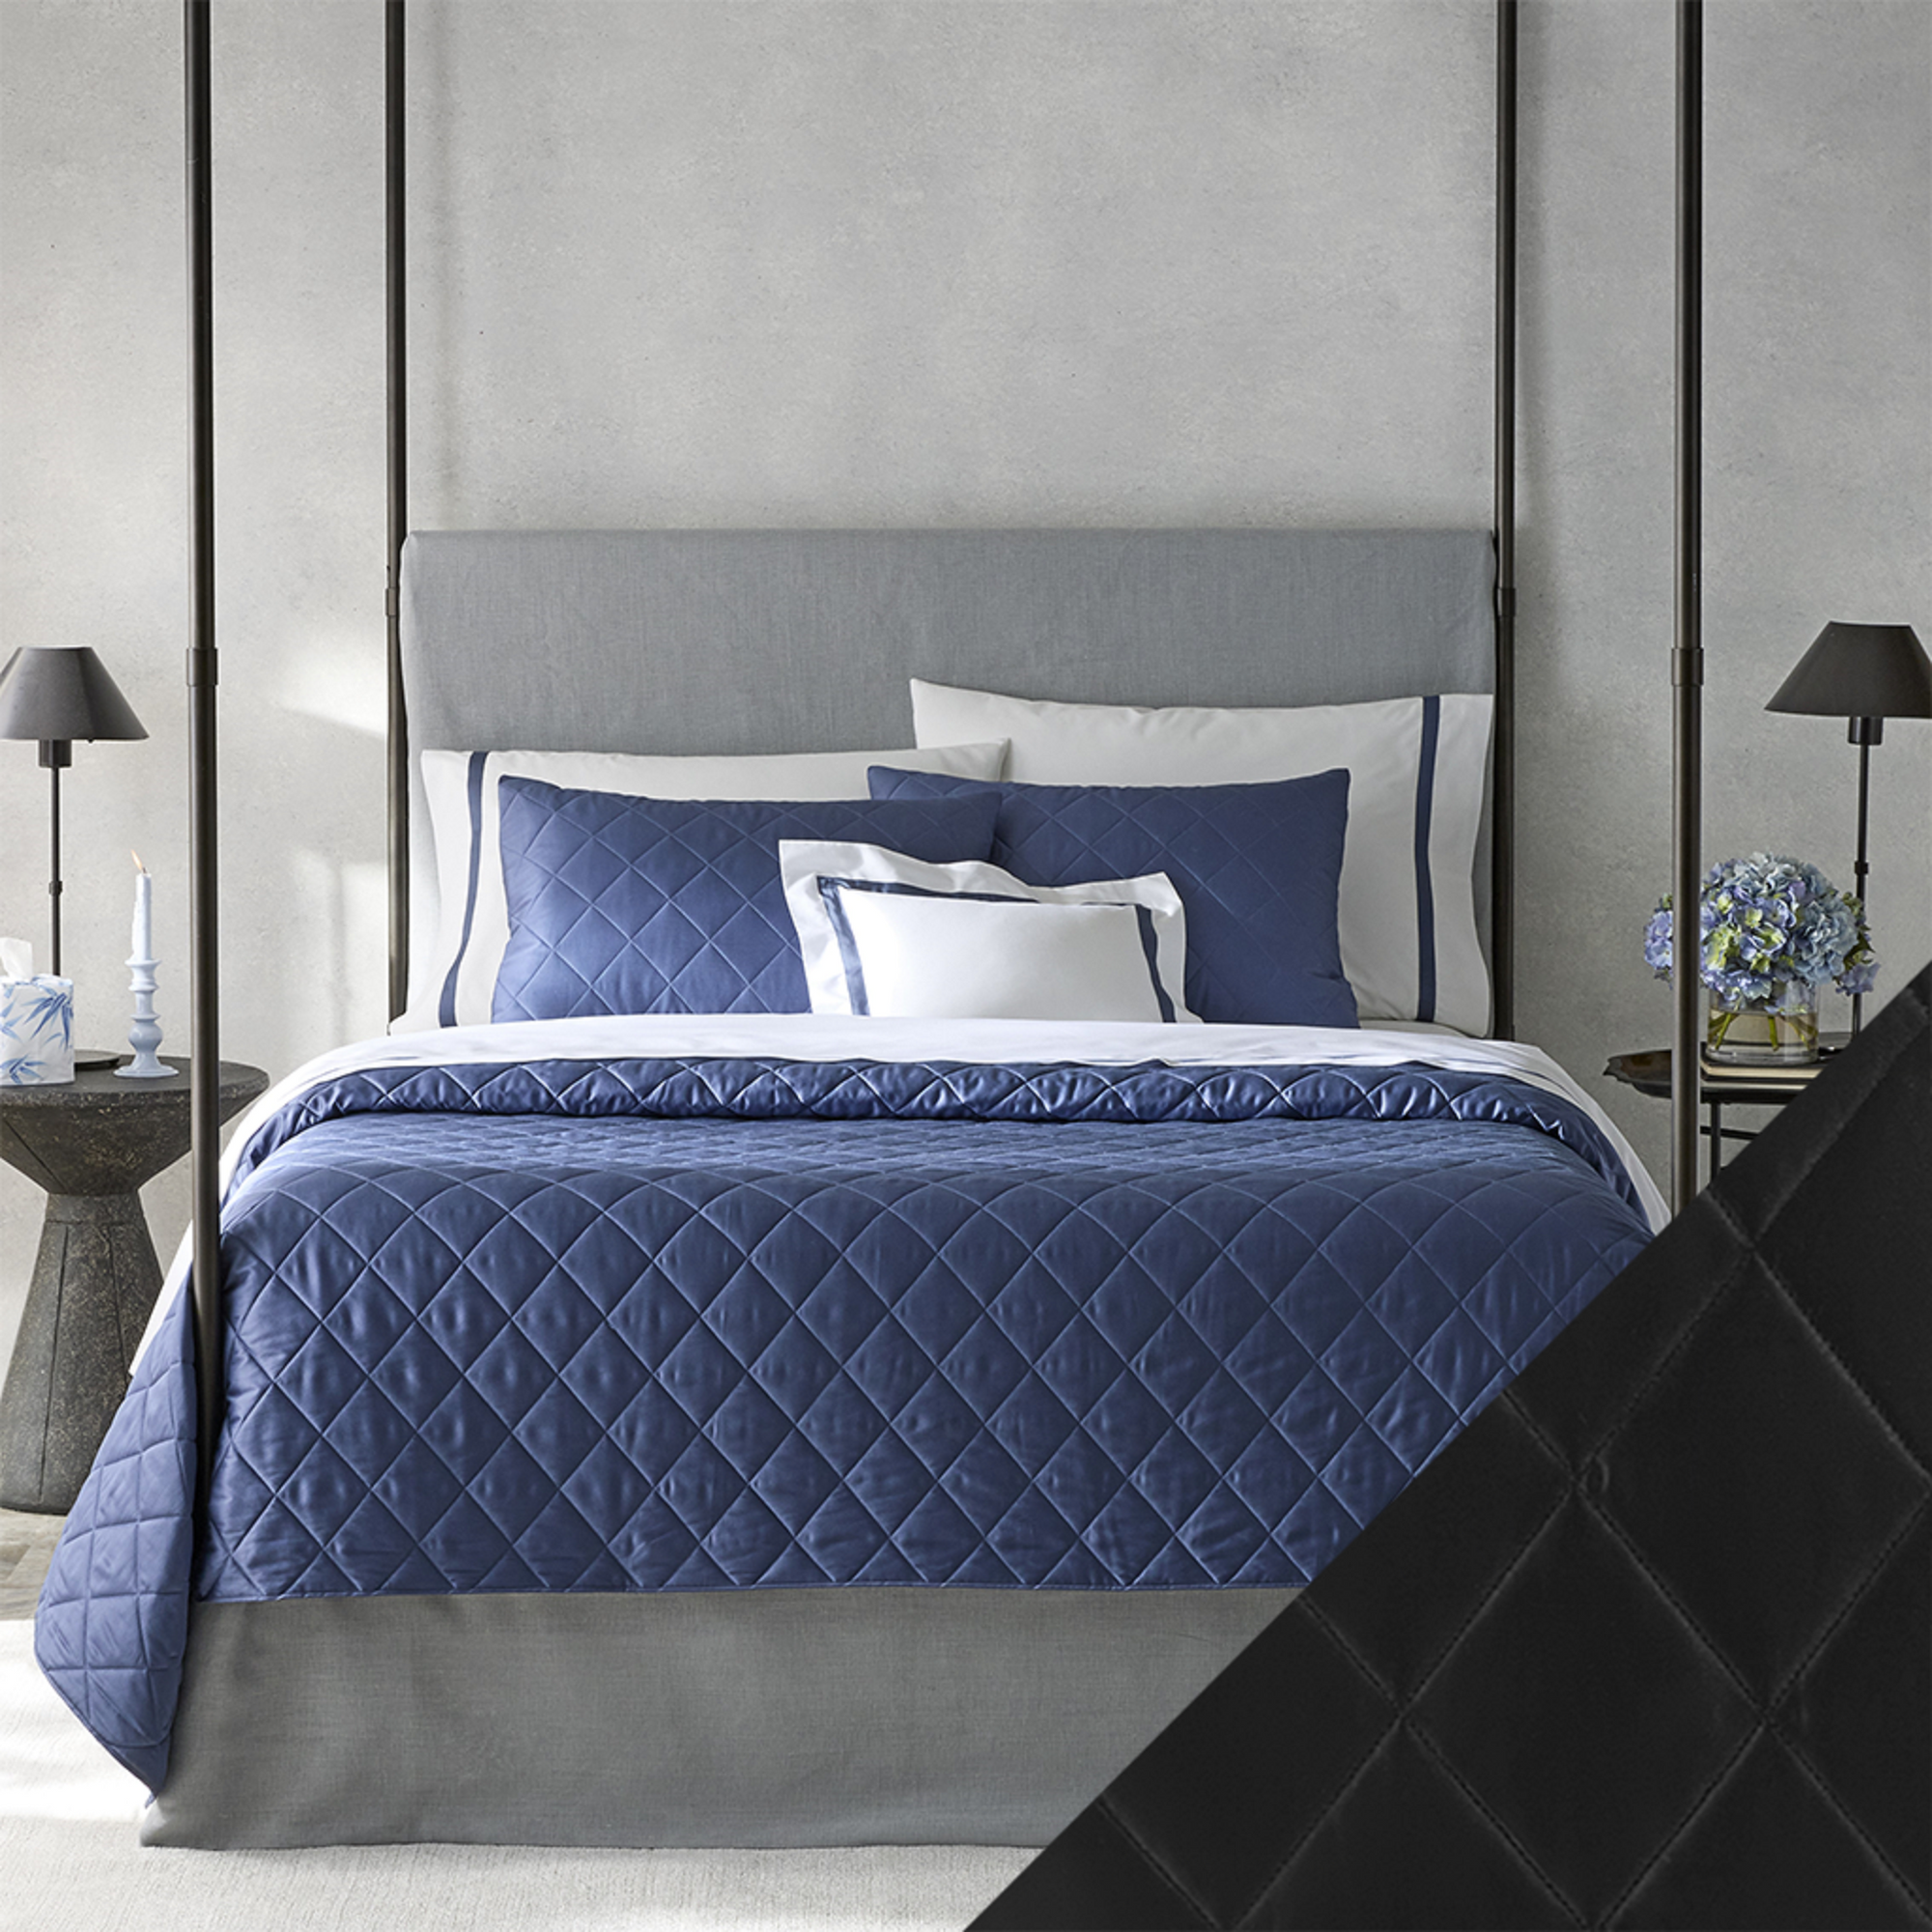 Matouk Nocturne Bedding Main Image with Swatch in Black